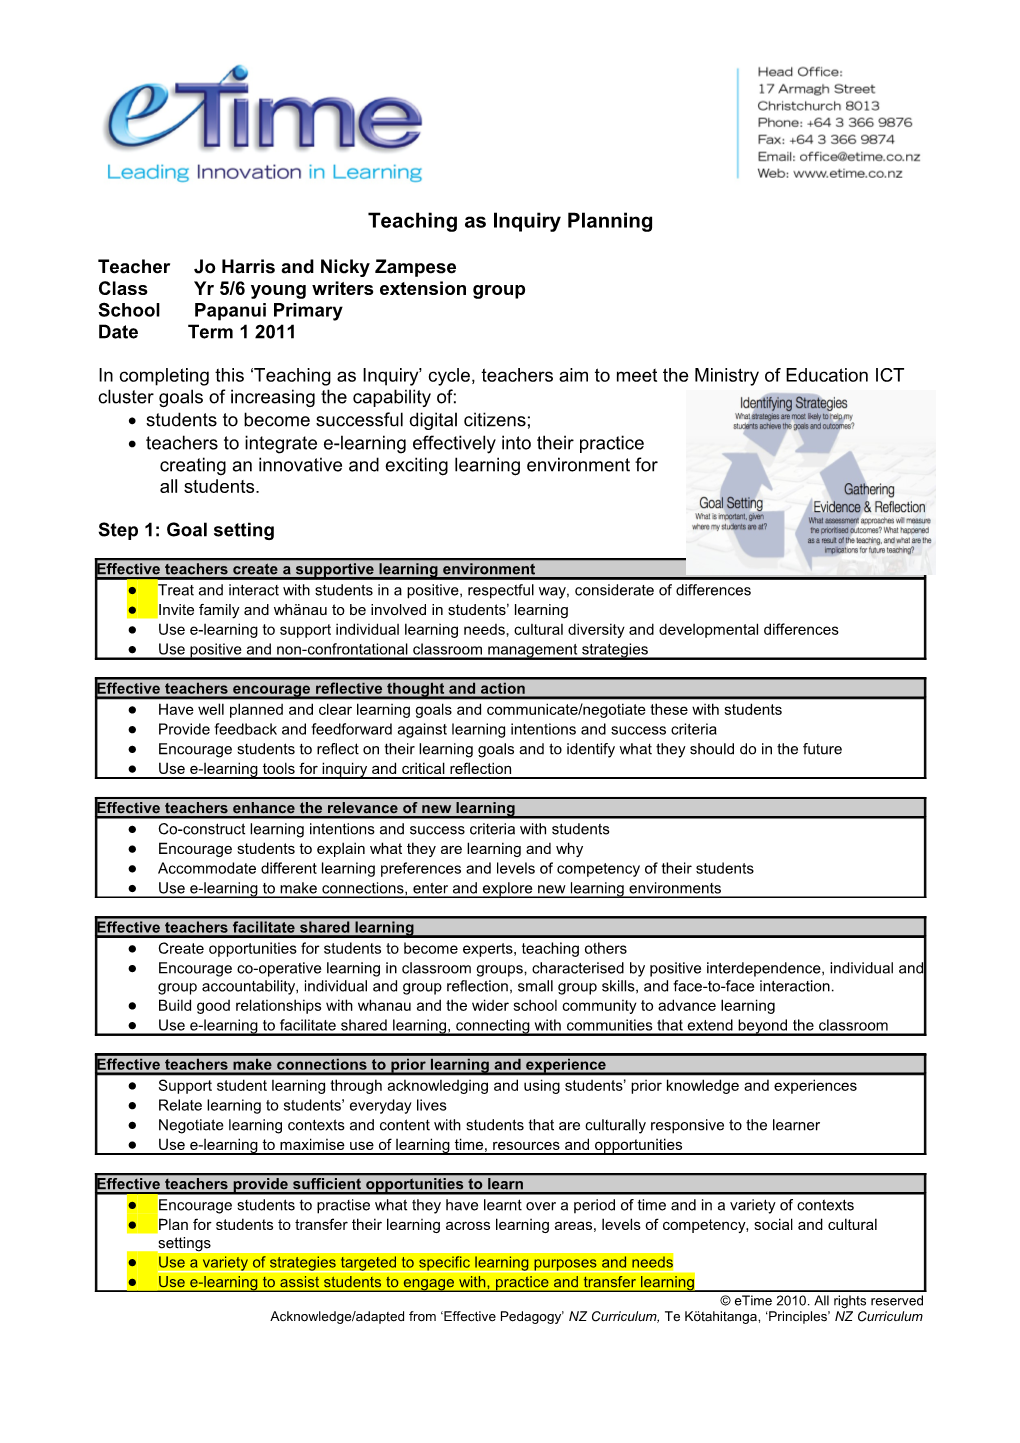 Teaching As Inquiry Planning s2